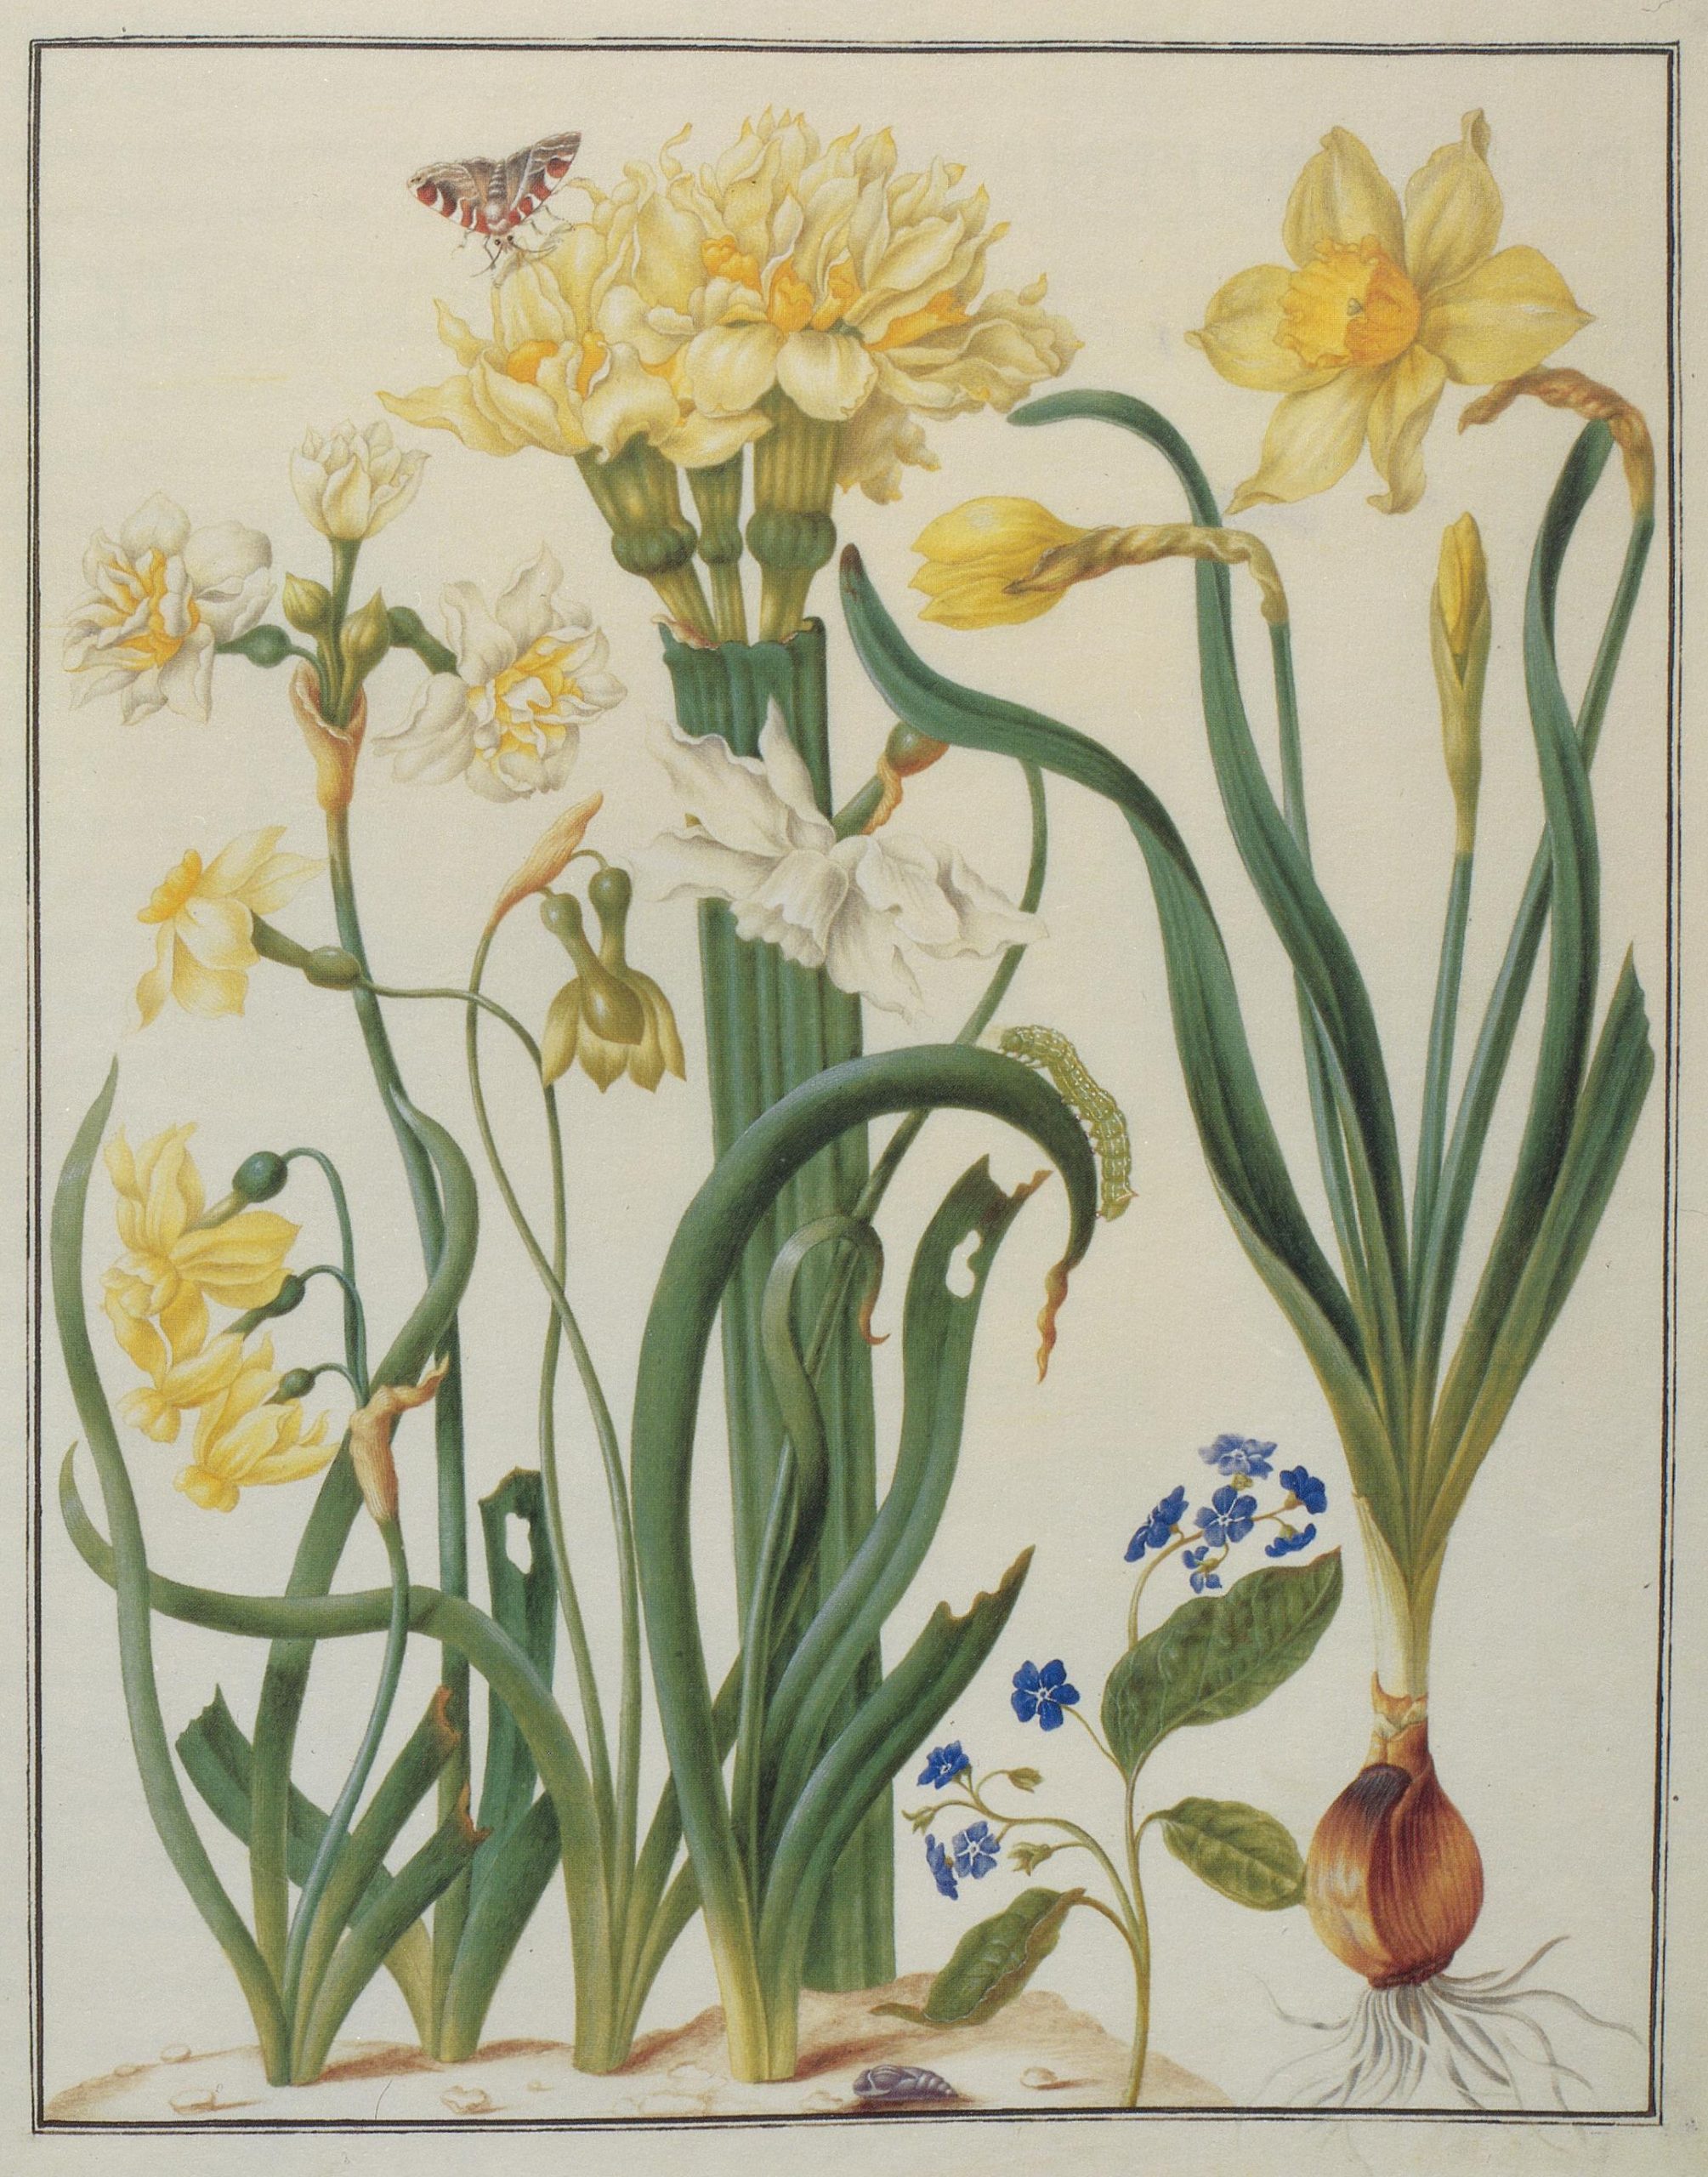 A detailed illustration of daffodils and forget-me-nots